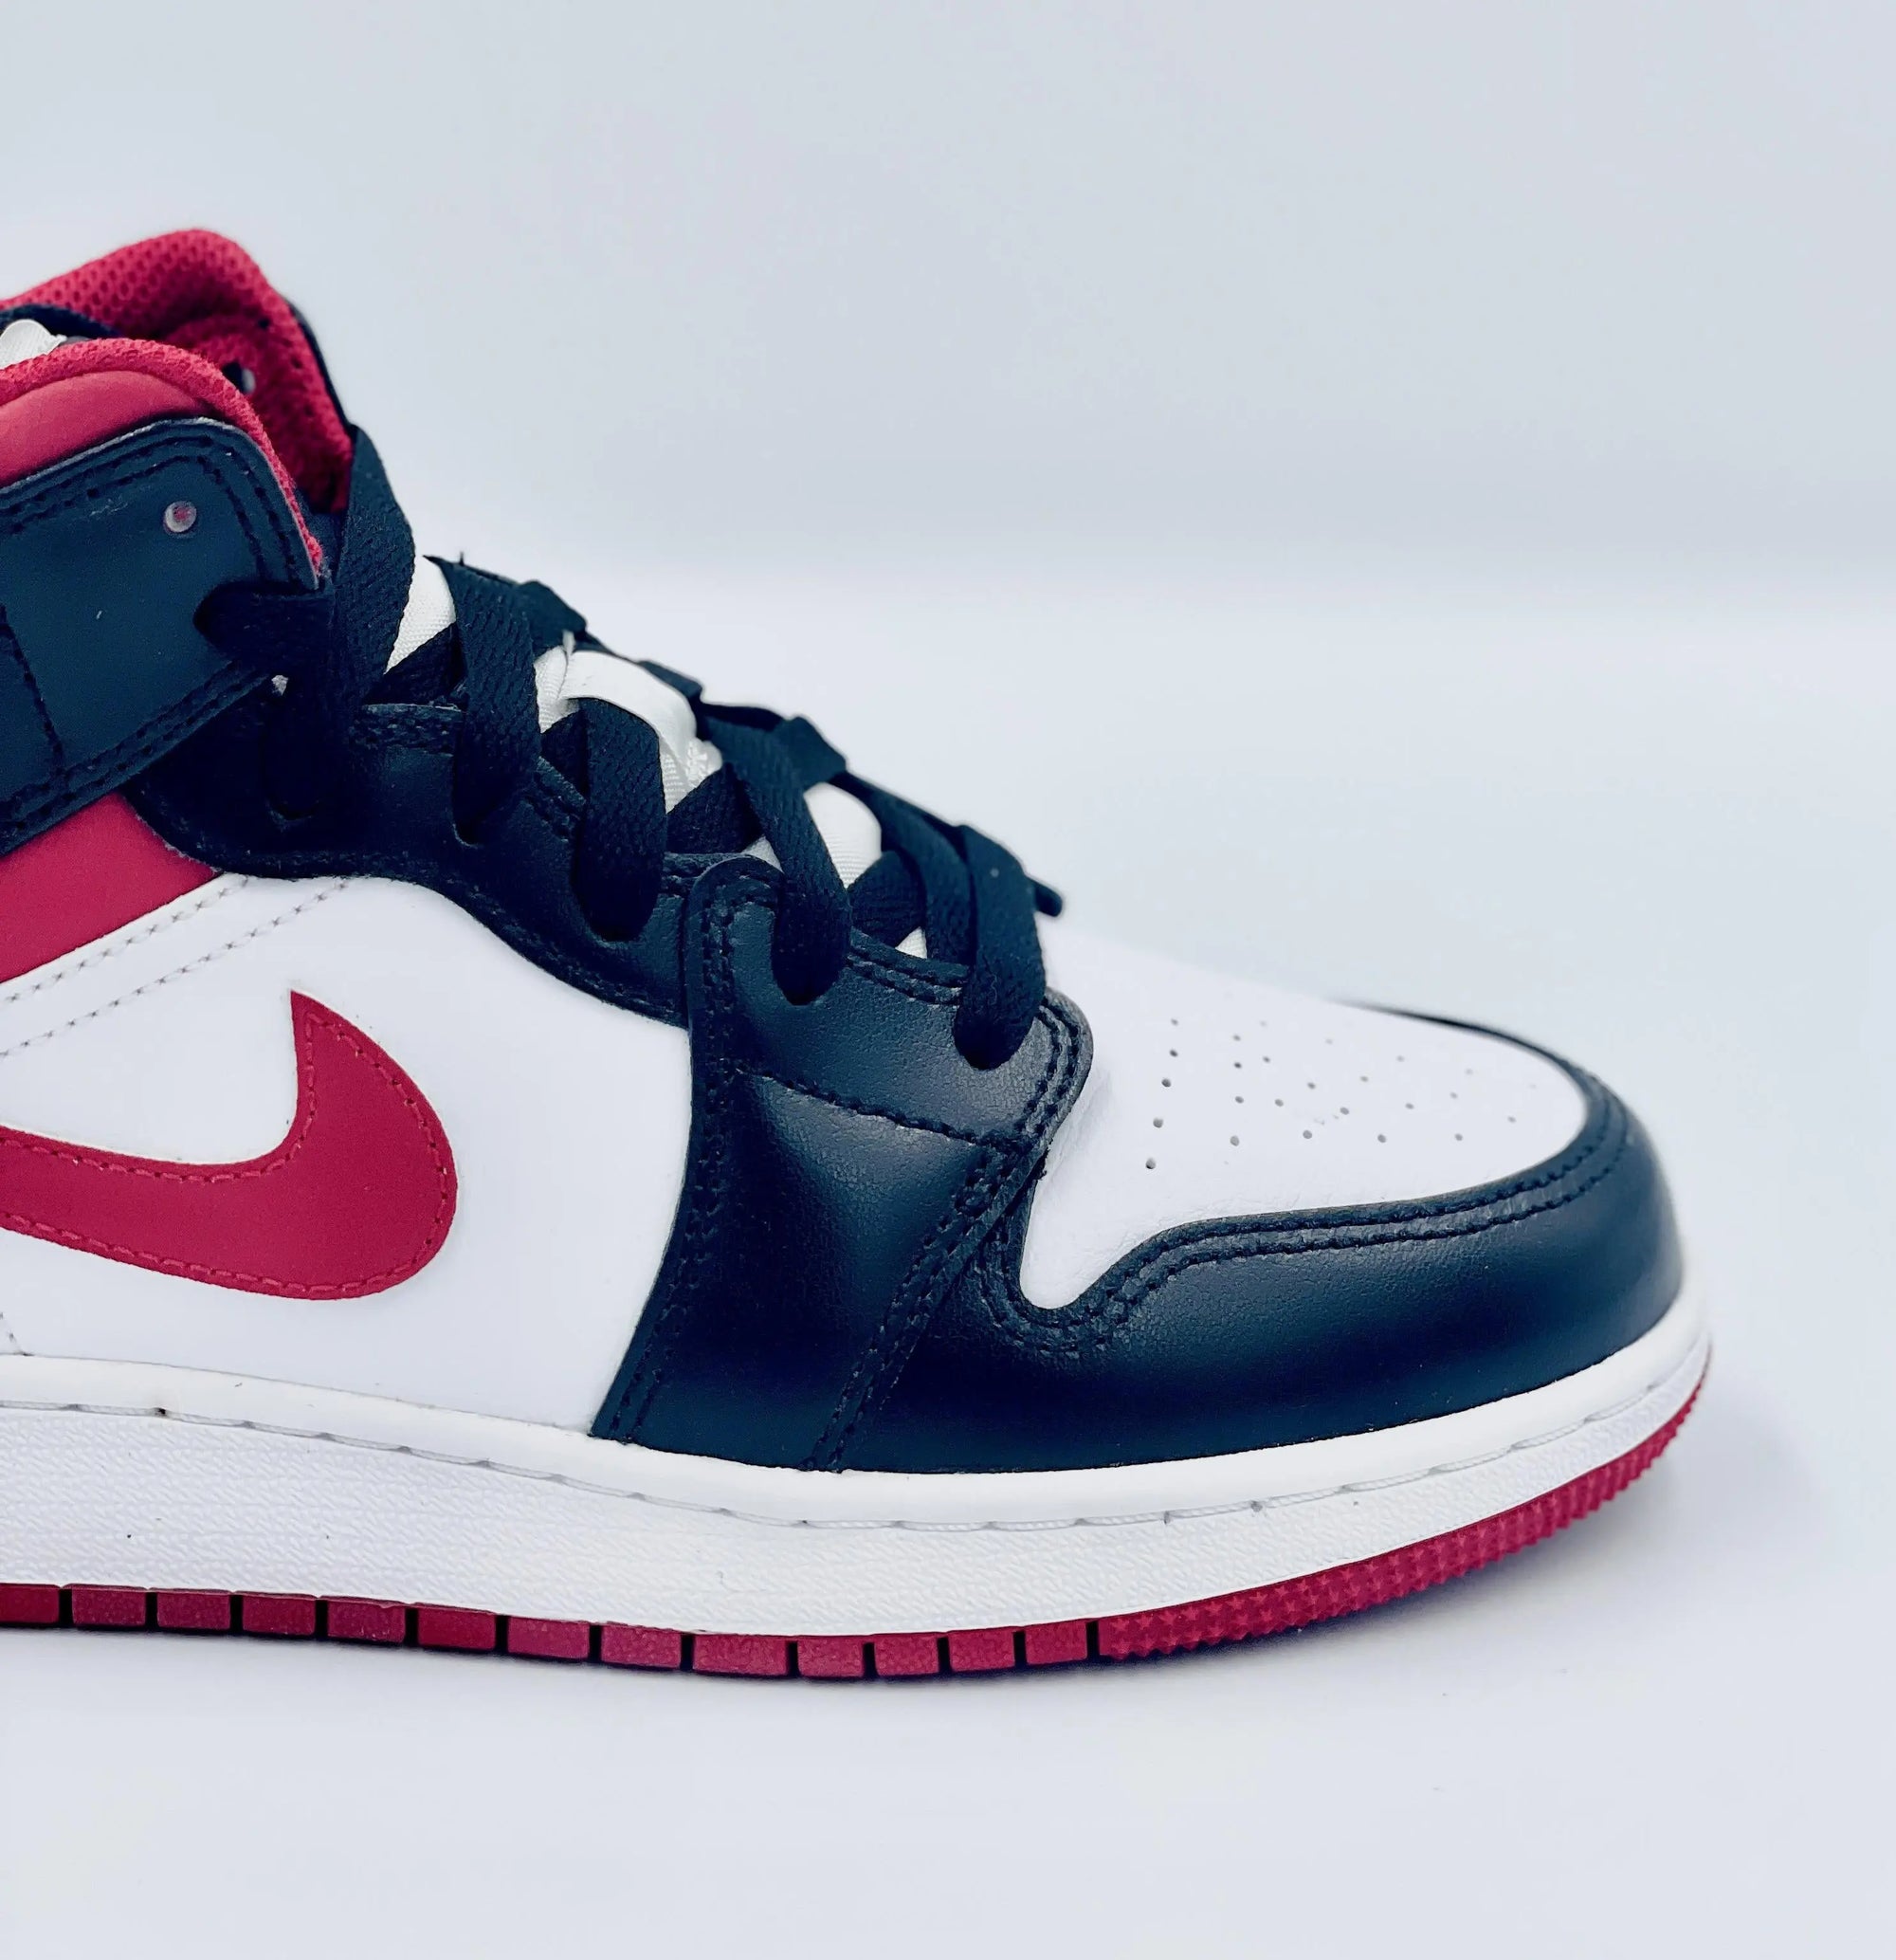 Shop the Air Jordan 1 Mid &#39;Gym Red&#39; (GS) and discover the latest and hottest shoes from Air Jordan, Nike, Yeezy and more at SA Sneakers, your 